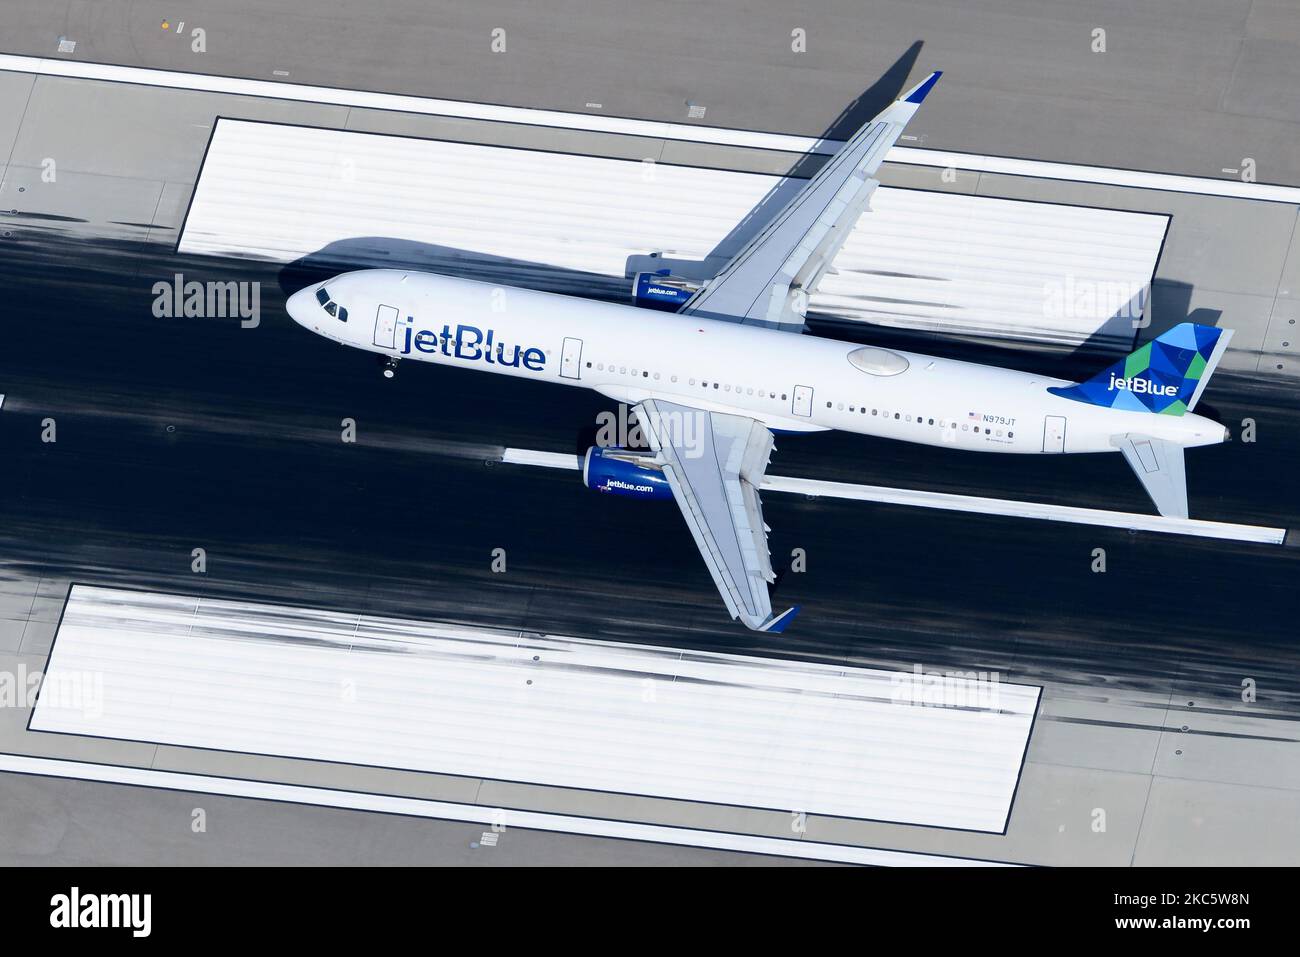 JetBlue Airbus A321 aircraft landing on airport runway. Airplane A321 of Jet Blue airline registered as N979JT. Stock Photo